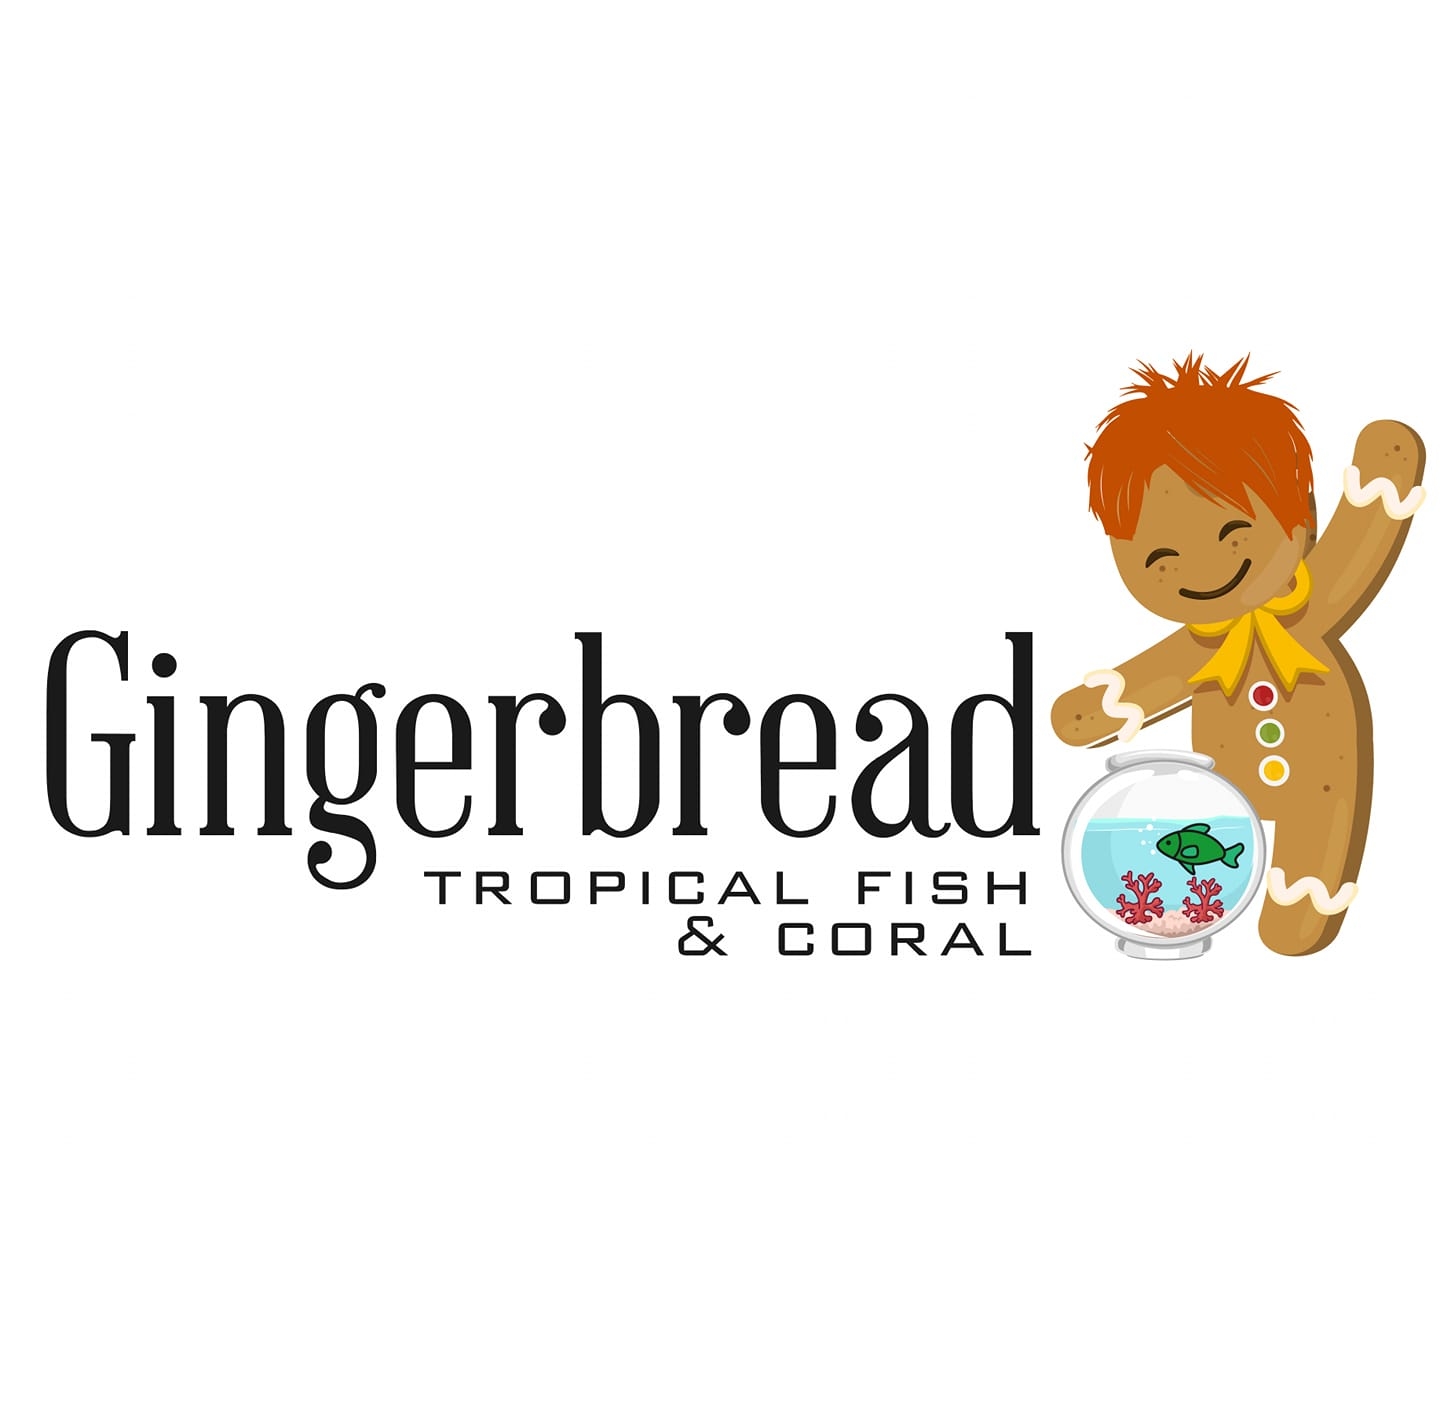 Company logo of Gingerbread Tropical Fish & Coral